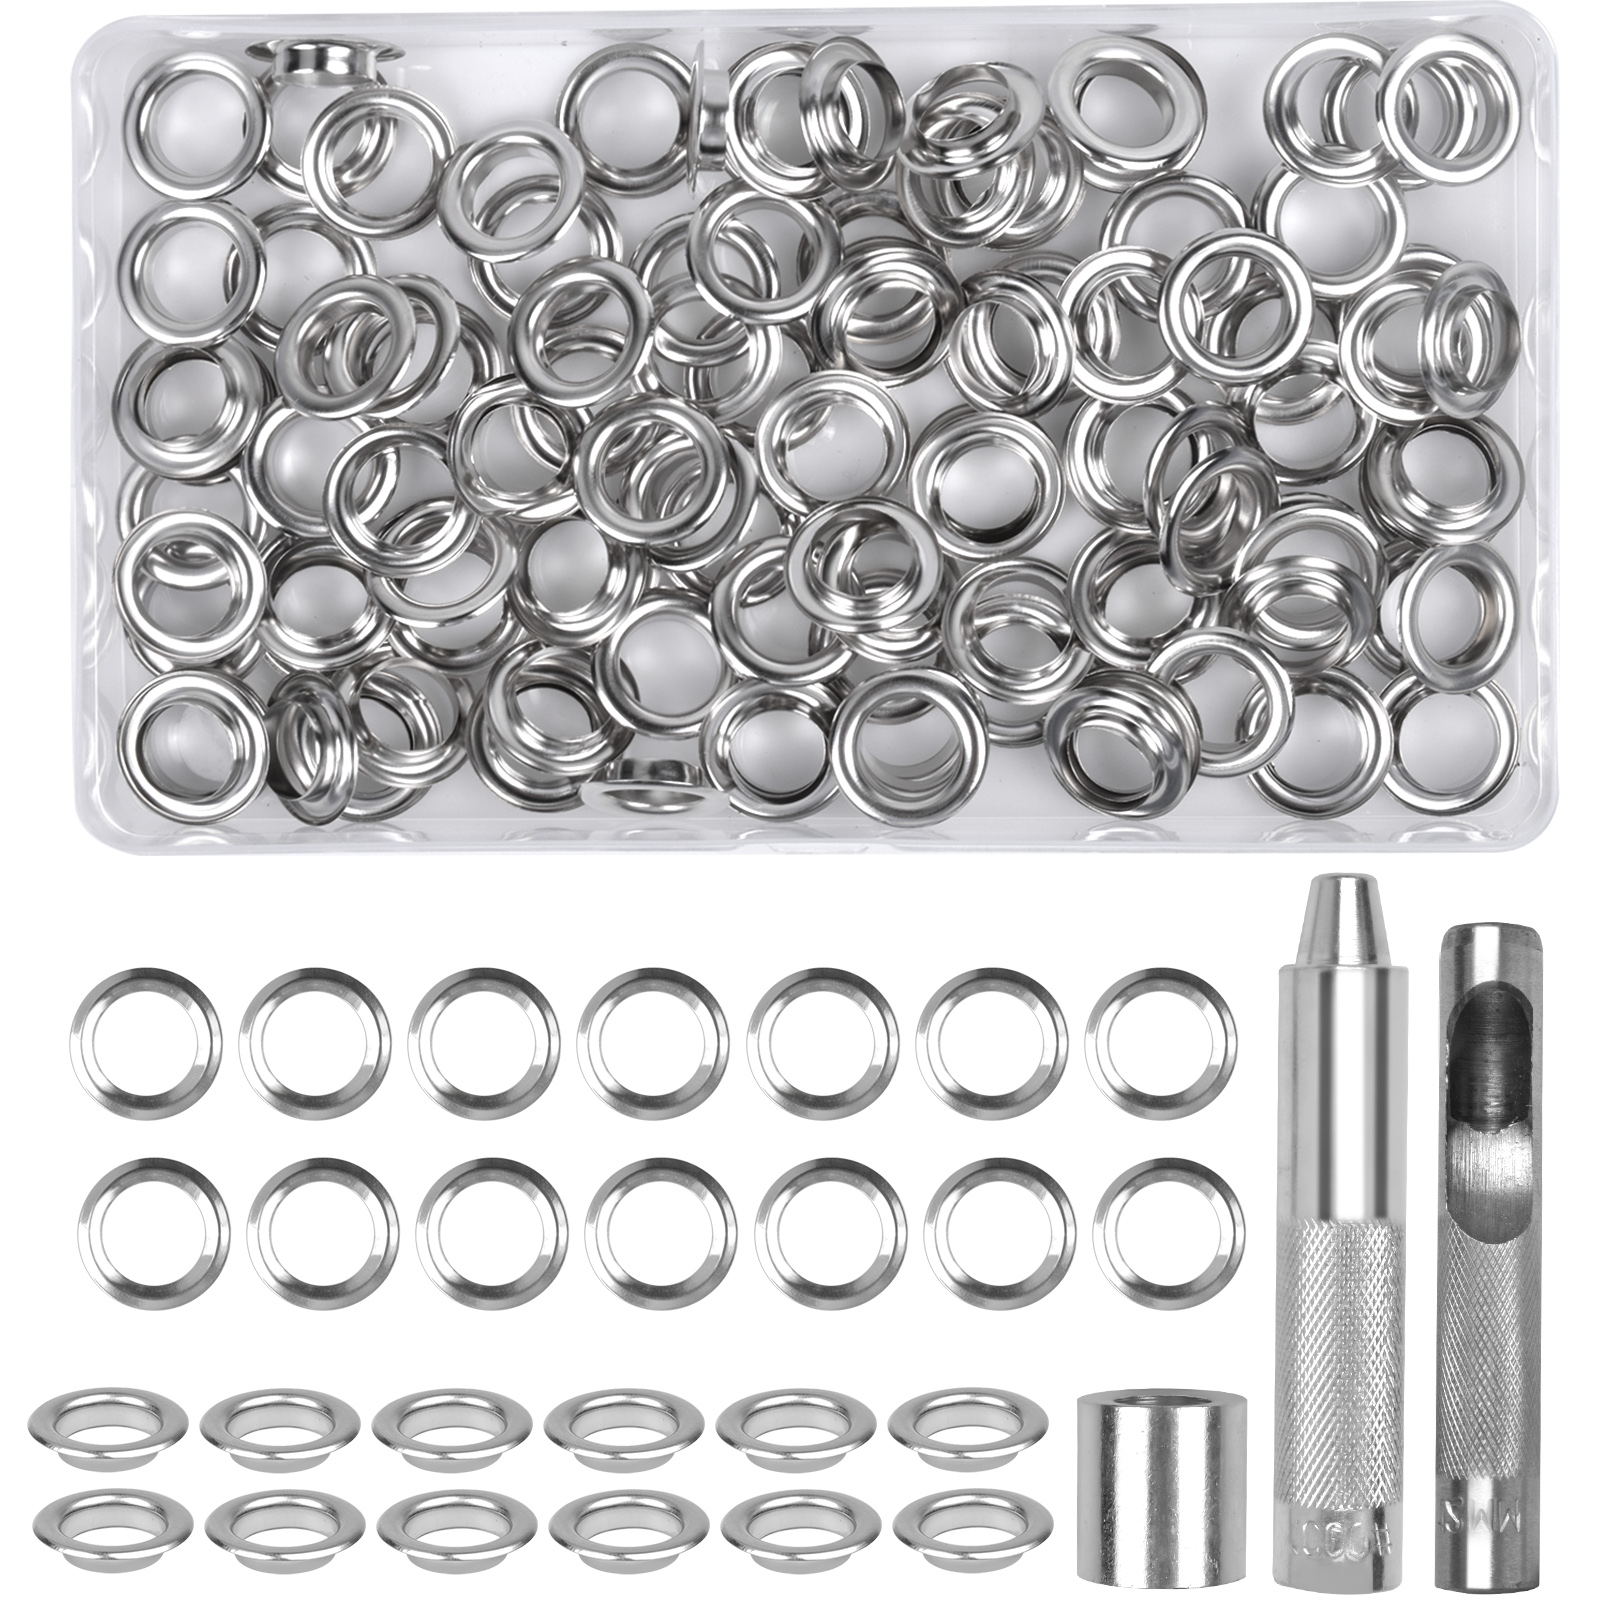 100 Sets Grommet Kit With Eyelets Washers 1/2 Inch 3Pcs